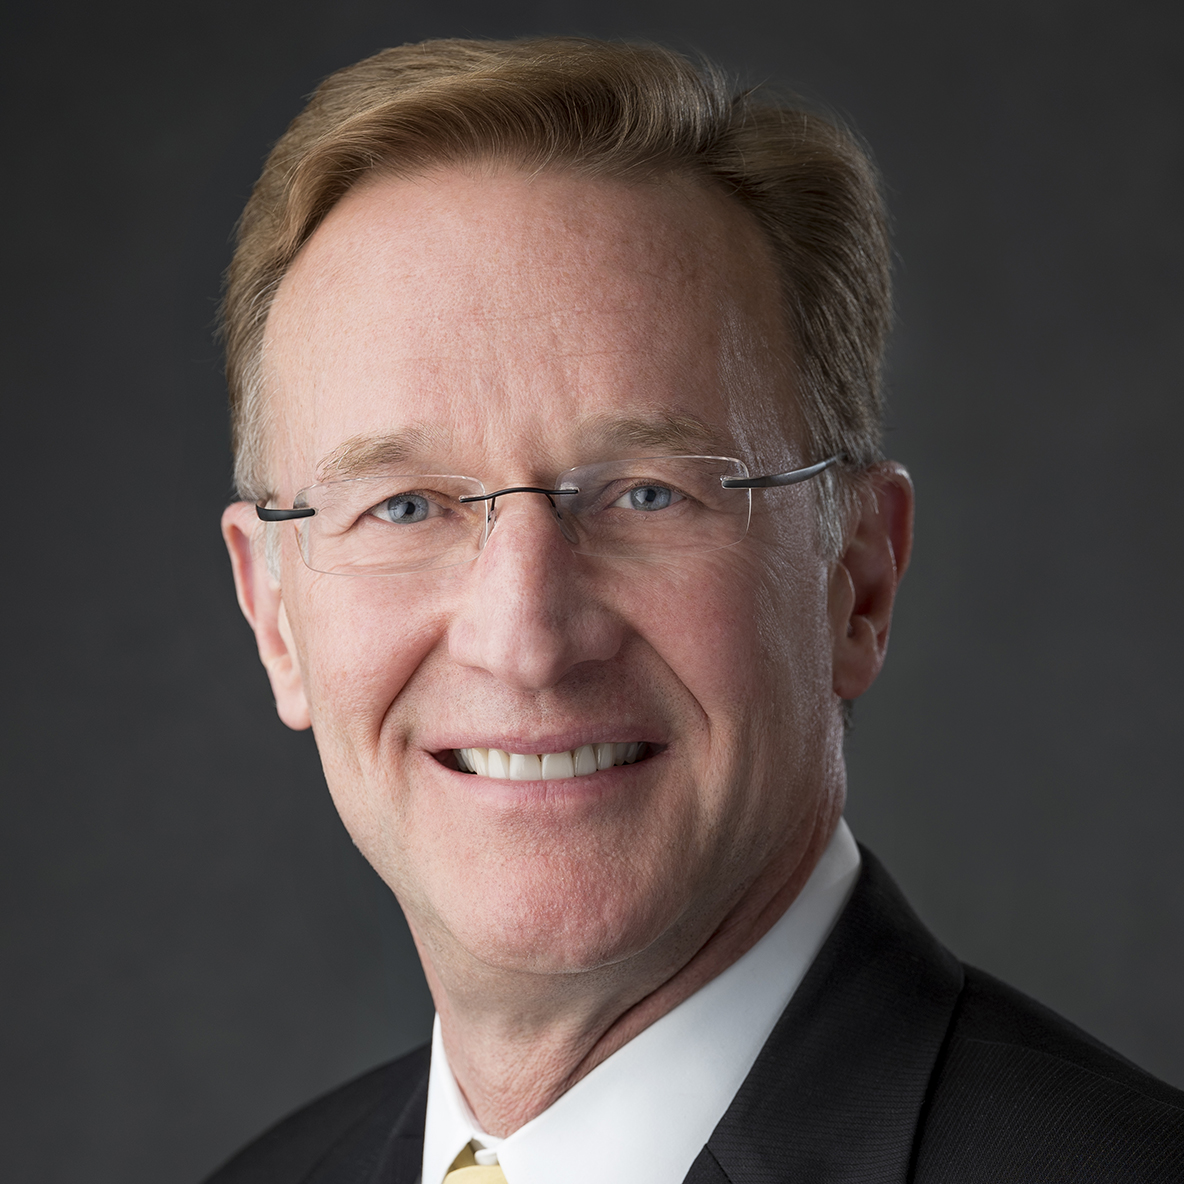 Wendell P. Weeks, Chairman and Chief Executive Officer